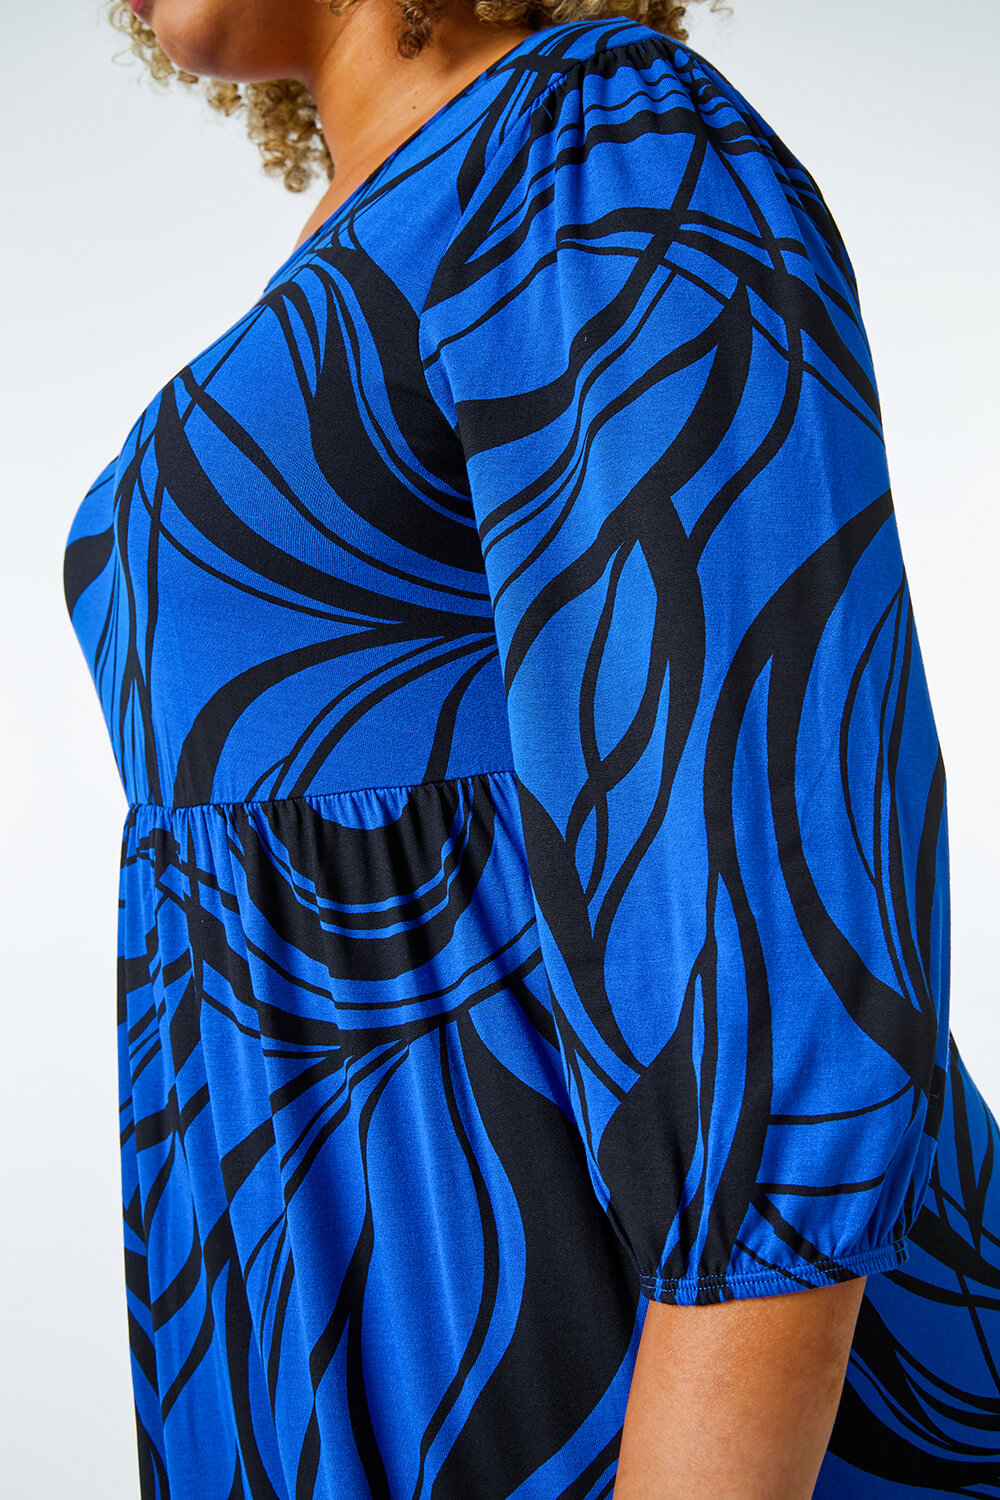 Royal Blue Curve Abstract Print Tiered Stretch Midi Dress, Image 5 of 5